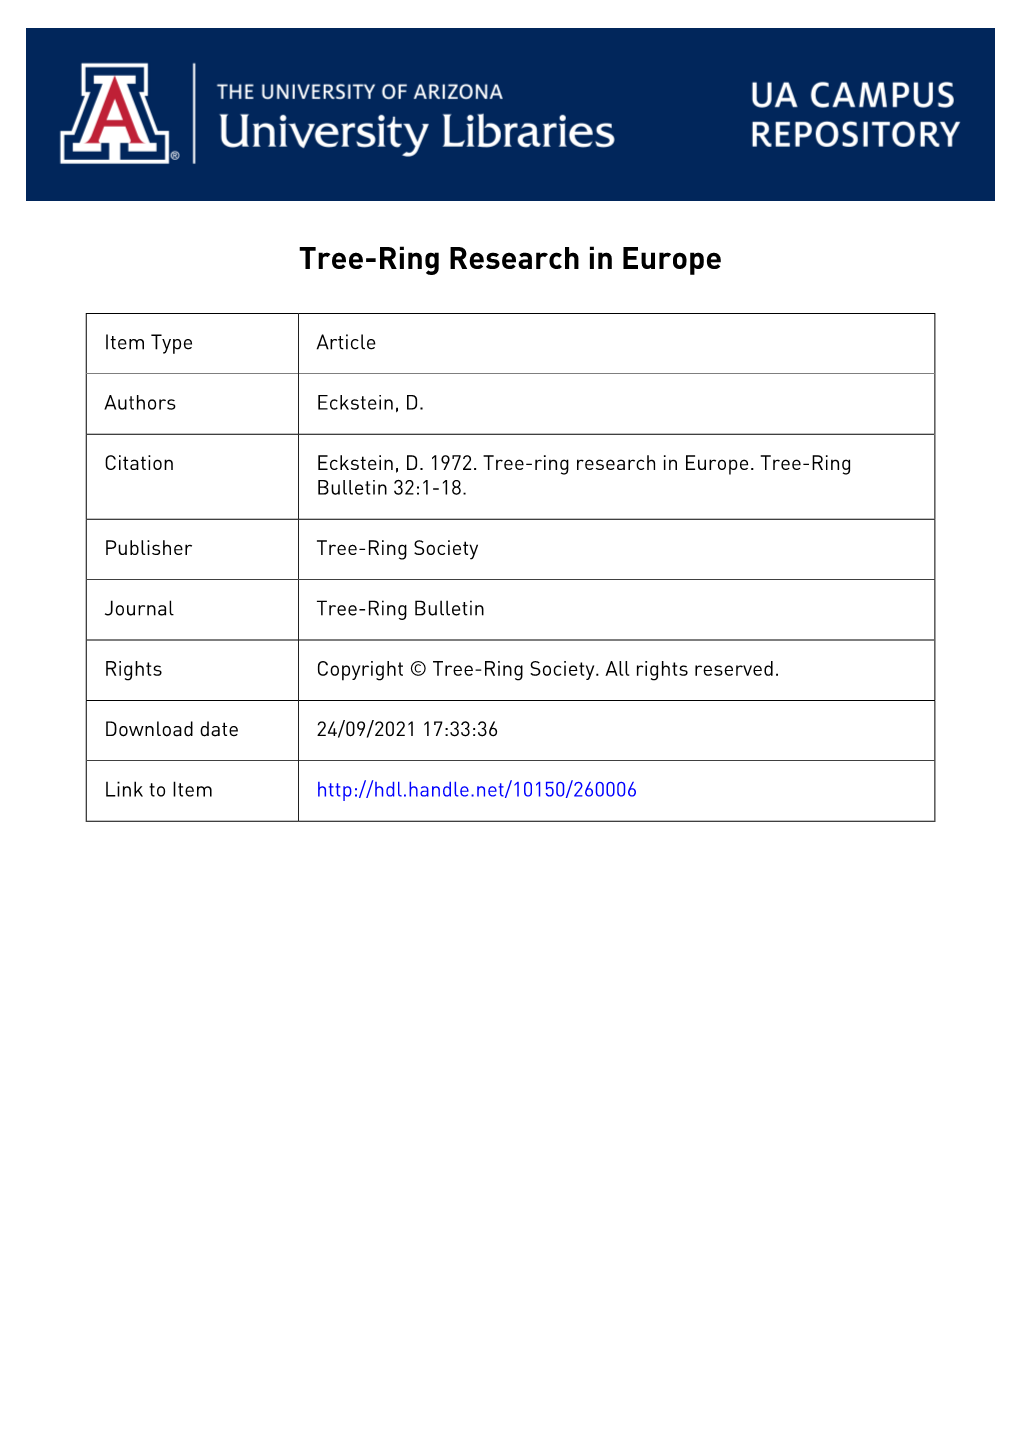 TREE -RING RESEARCH in EUROPE America Douglass (1919) Was